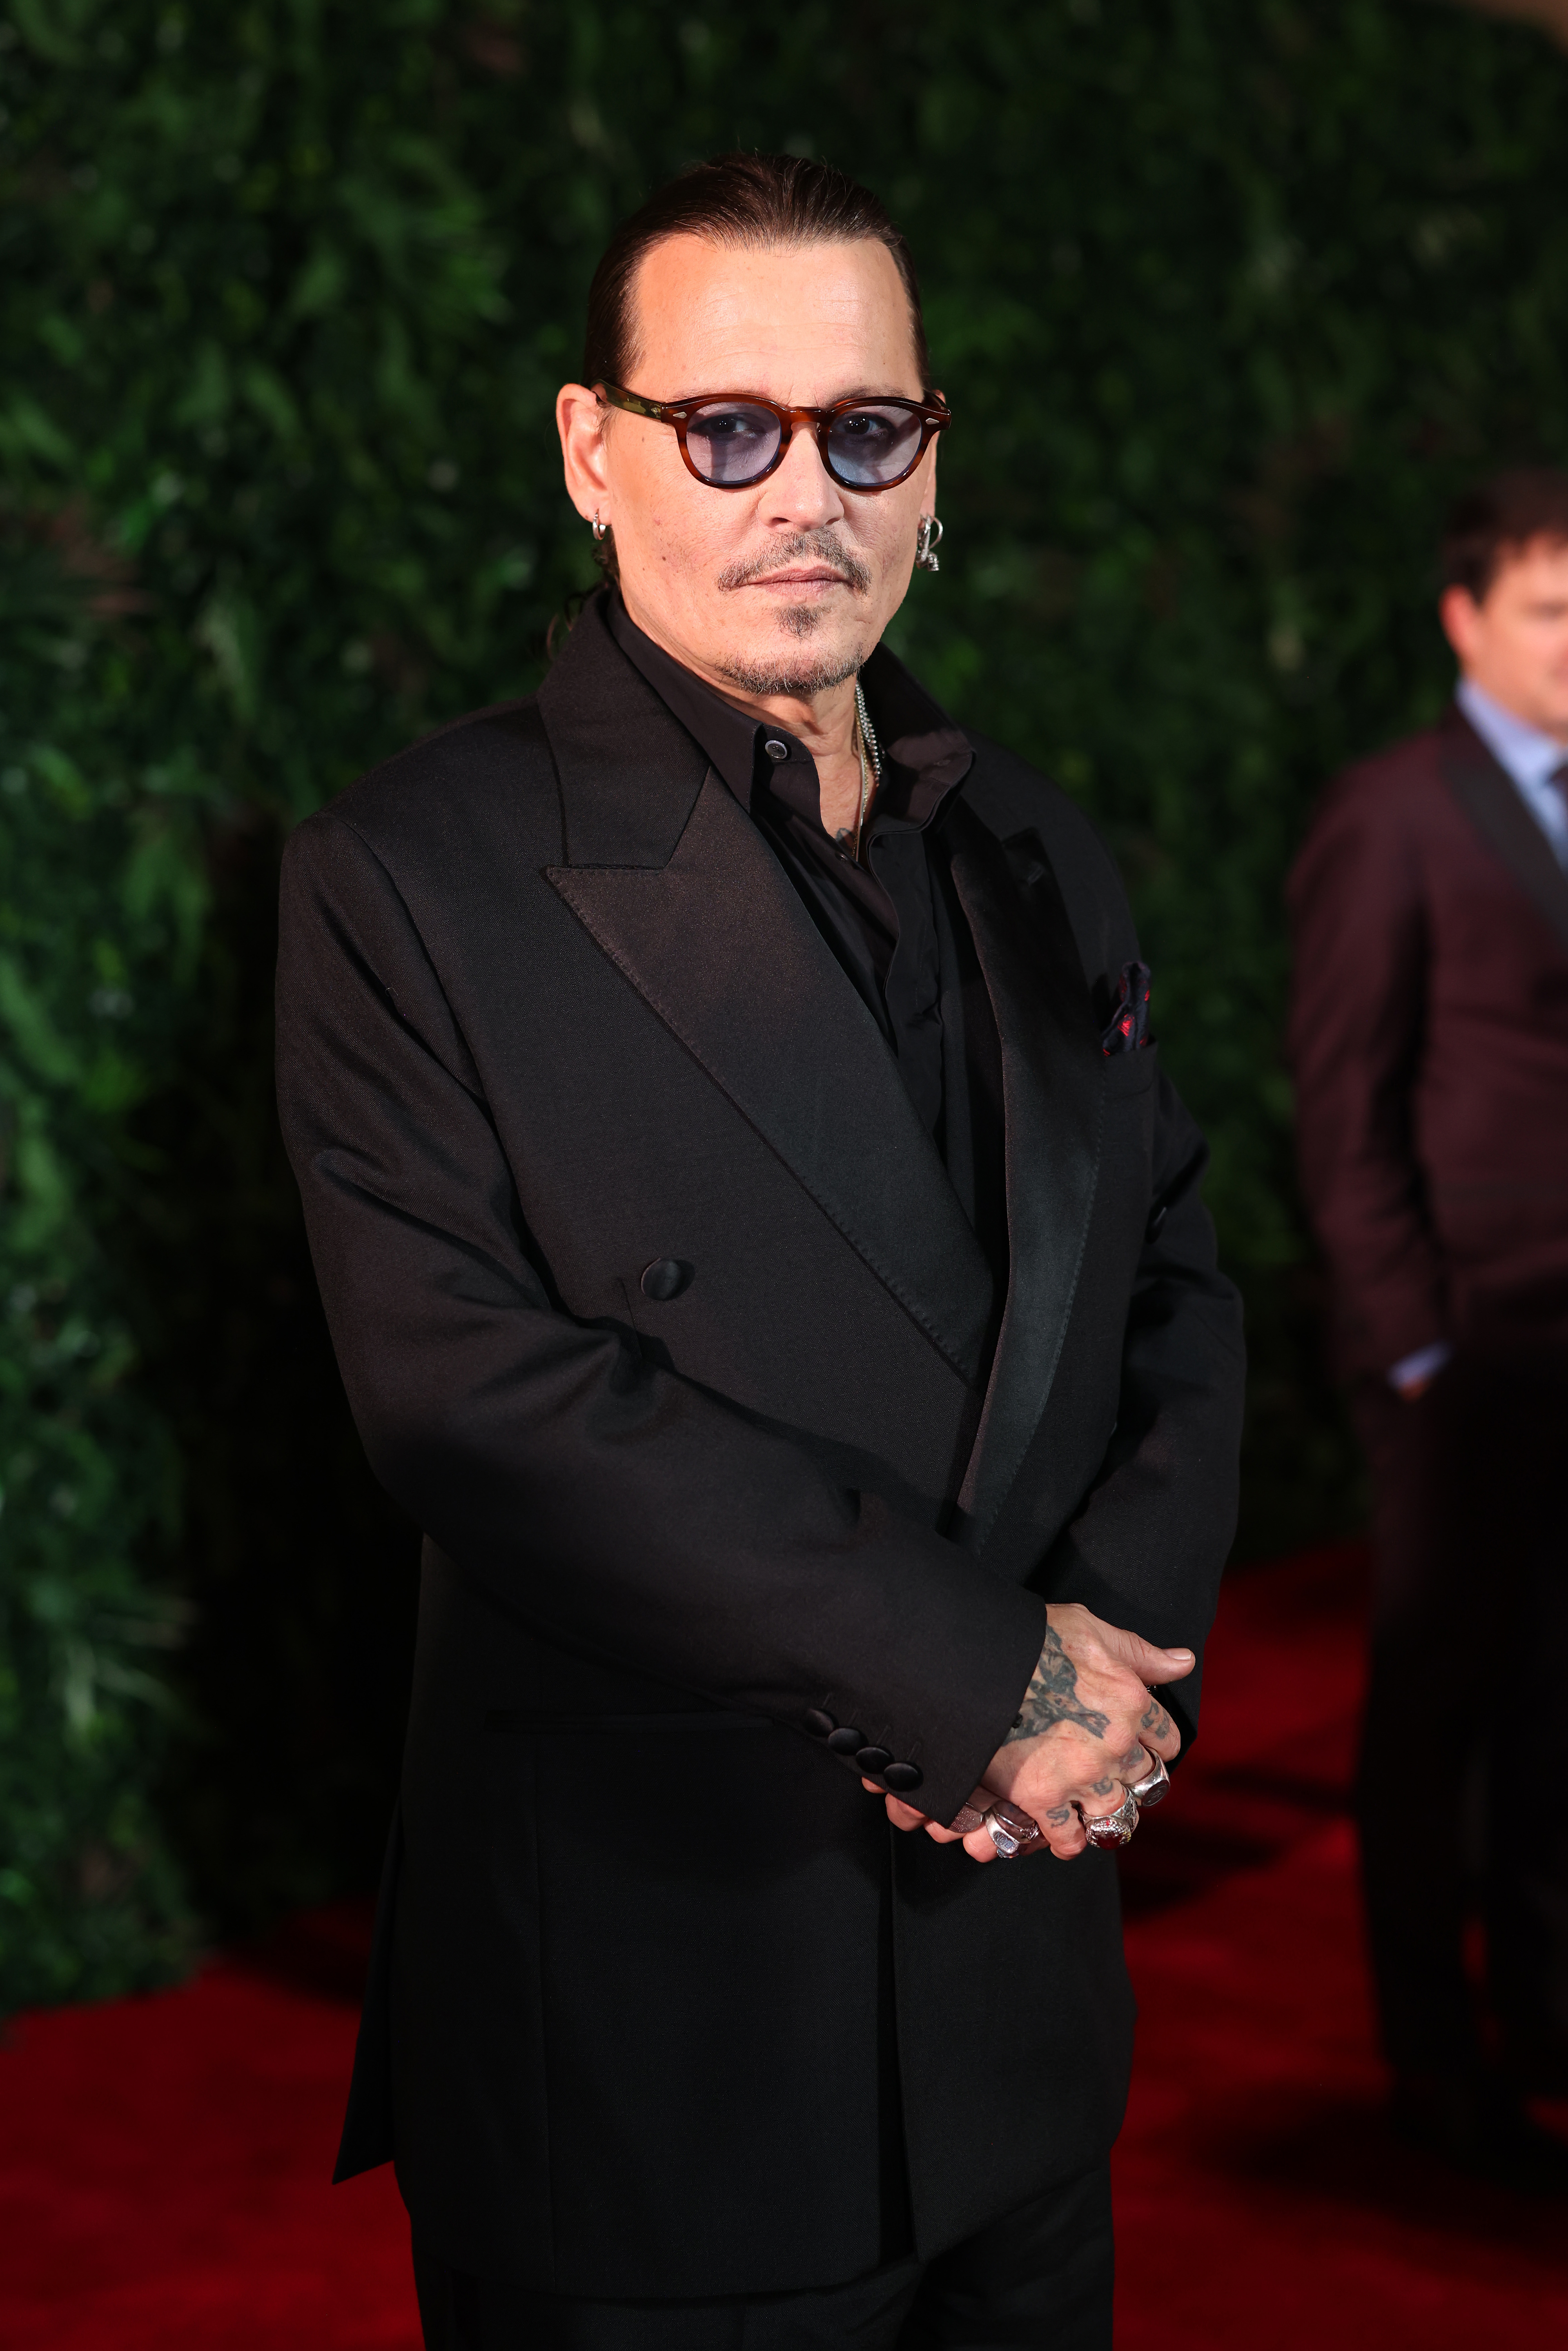 Johnny Depp in a black suit and sunglasses posing at an event